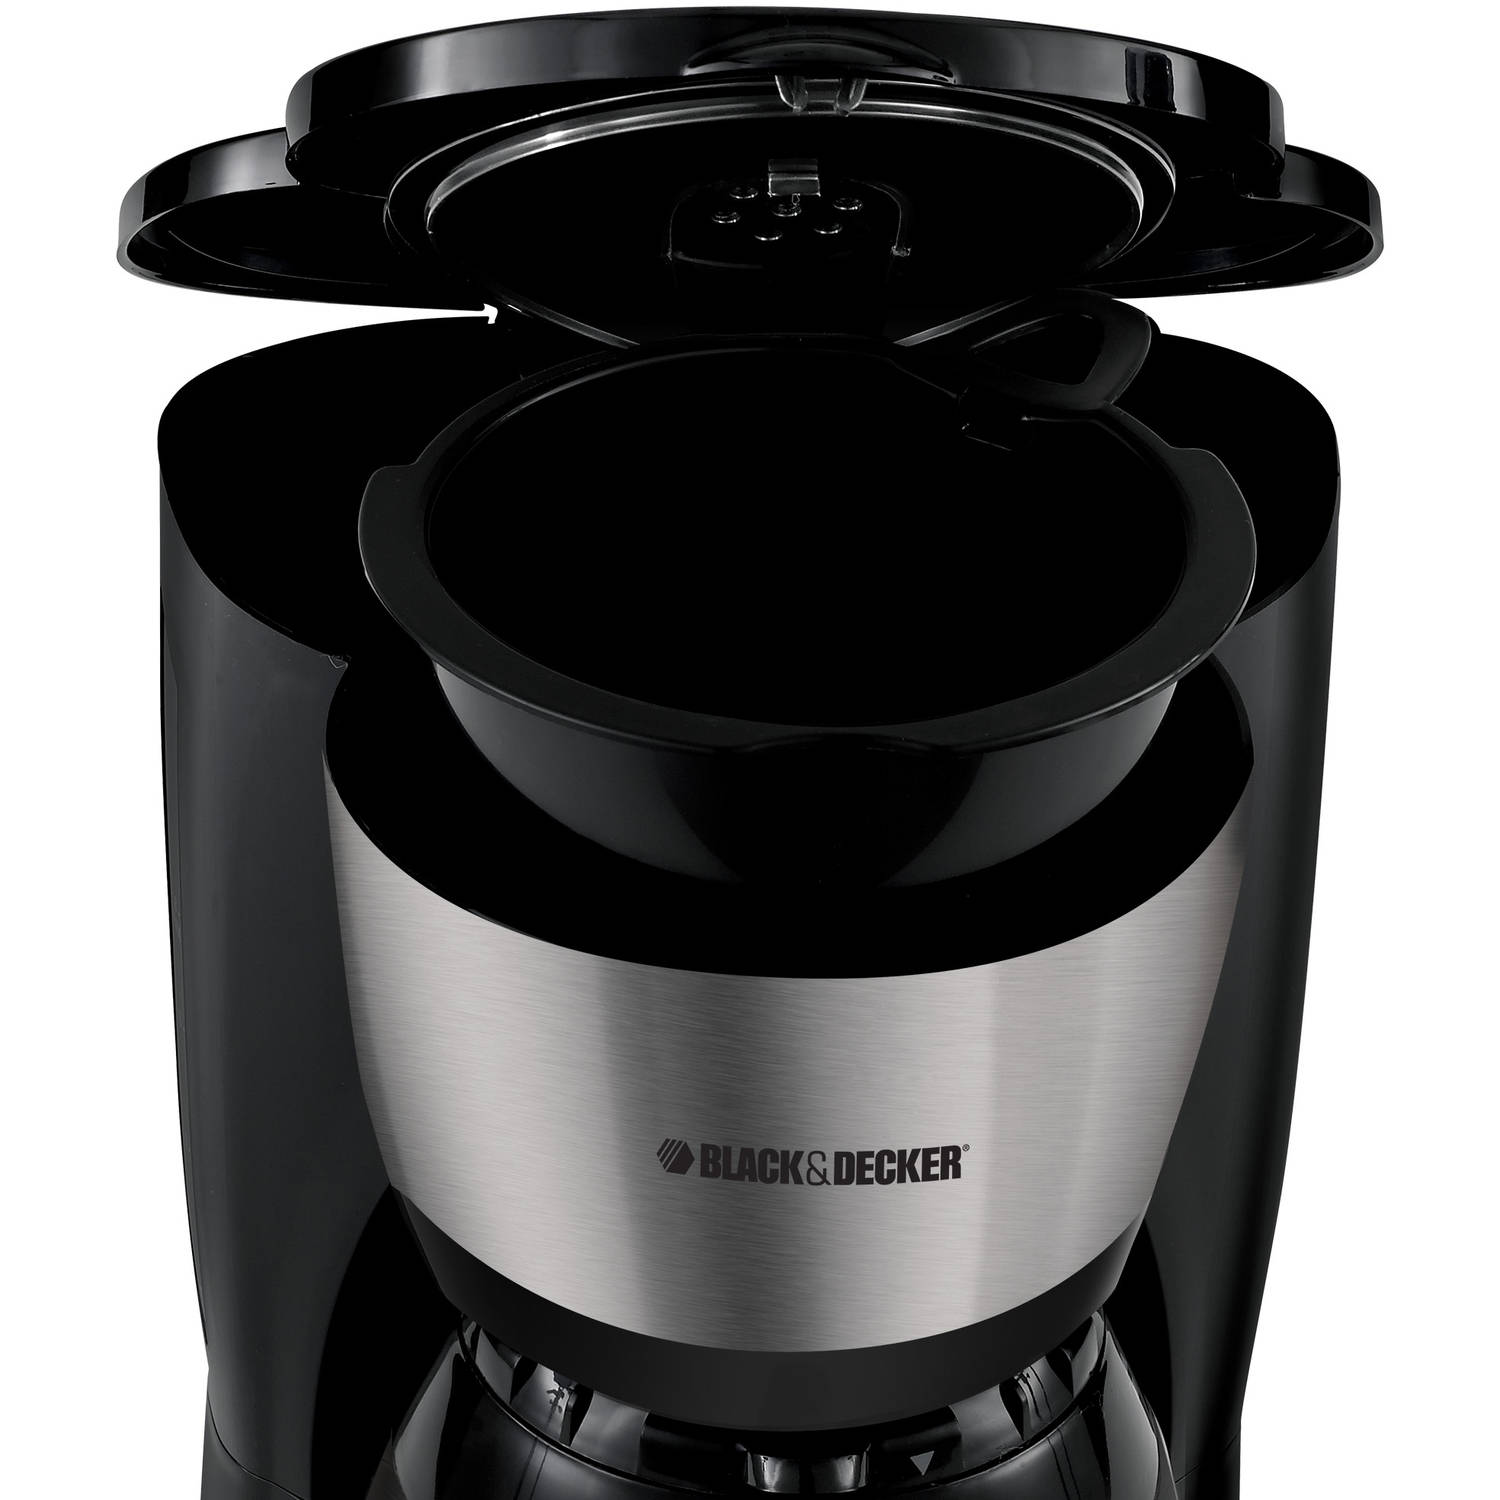 BLACK+DECKER 8-Cup Thermal Programmable Coffee Maker, Stainless Steel and Black, CM1609 - image 4 of 6